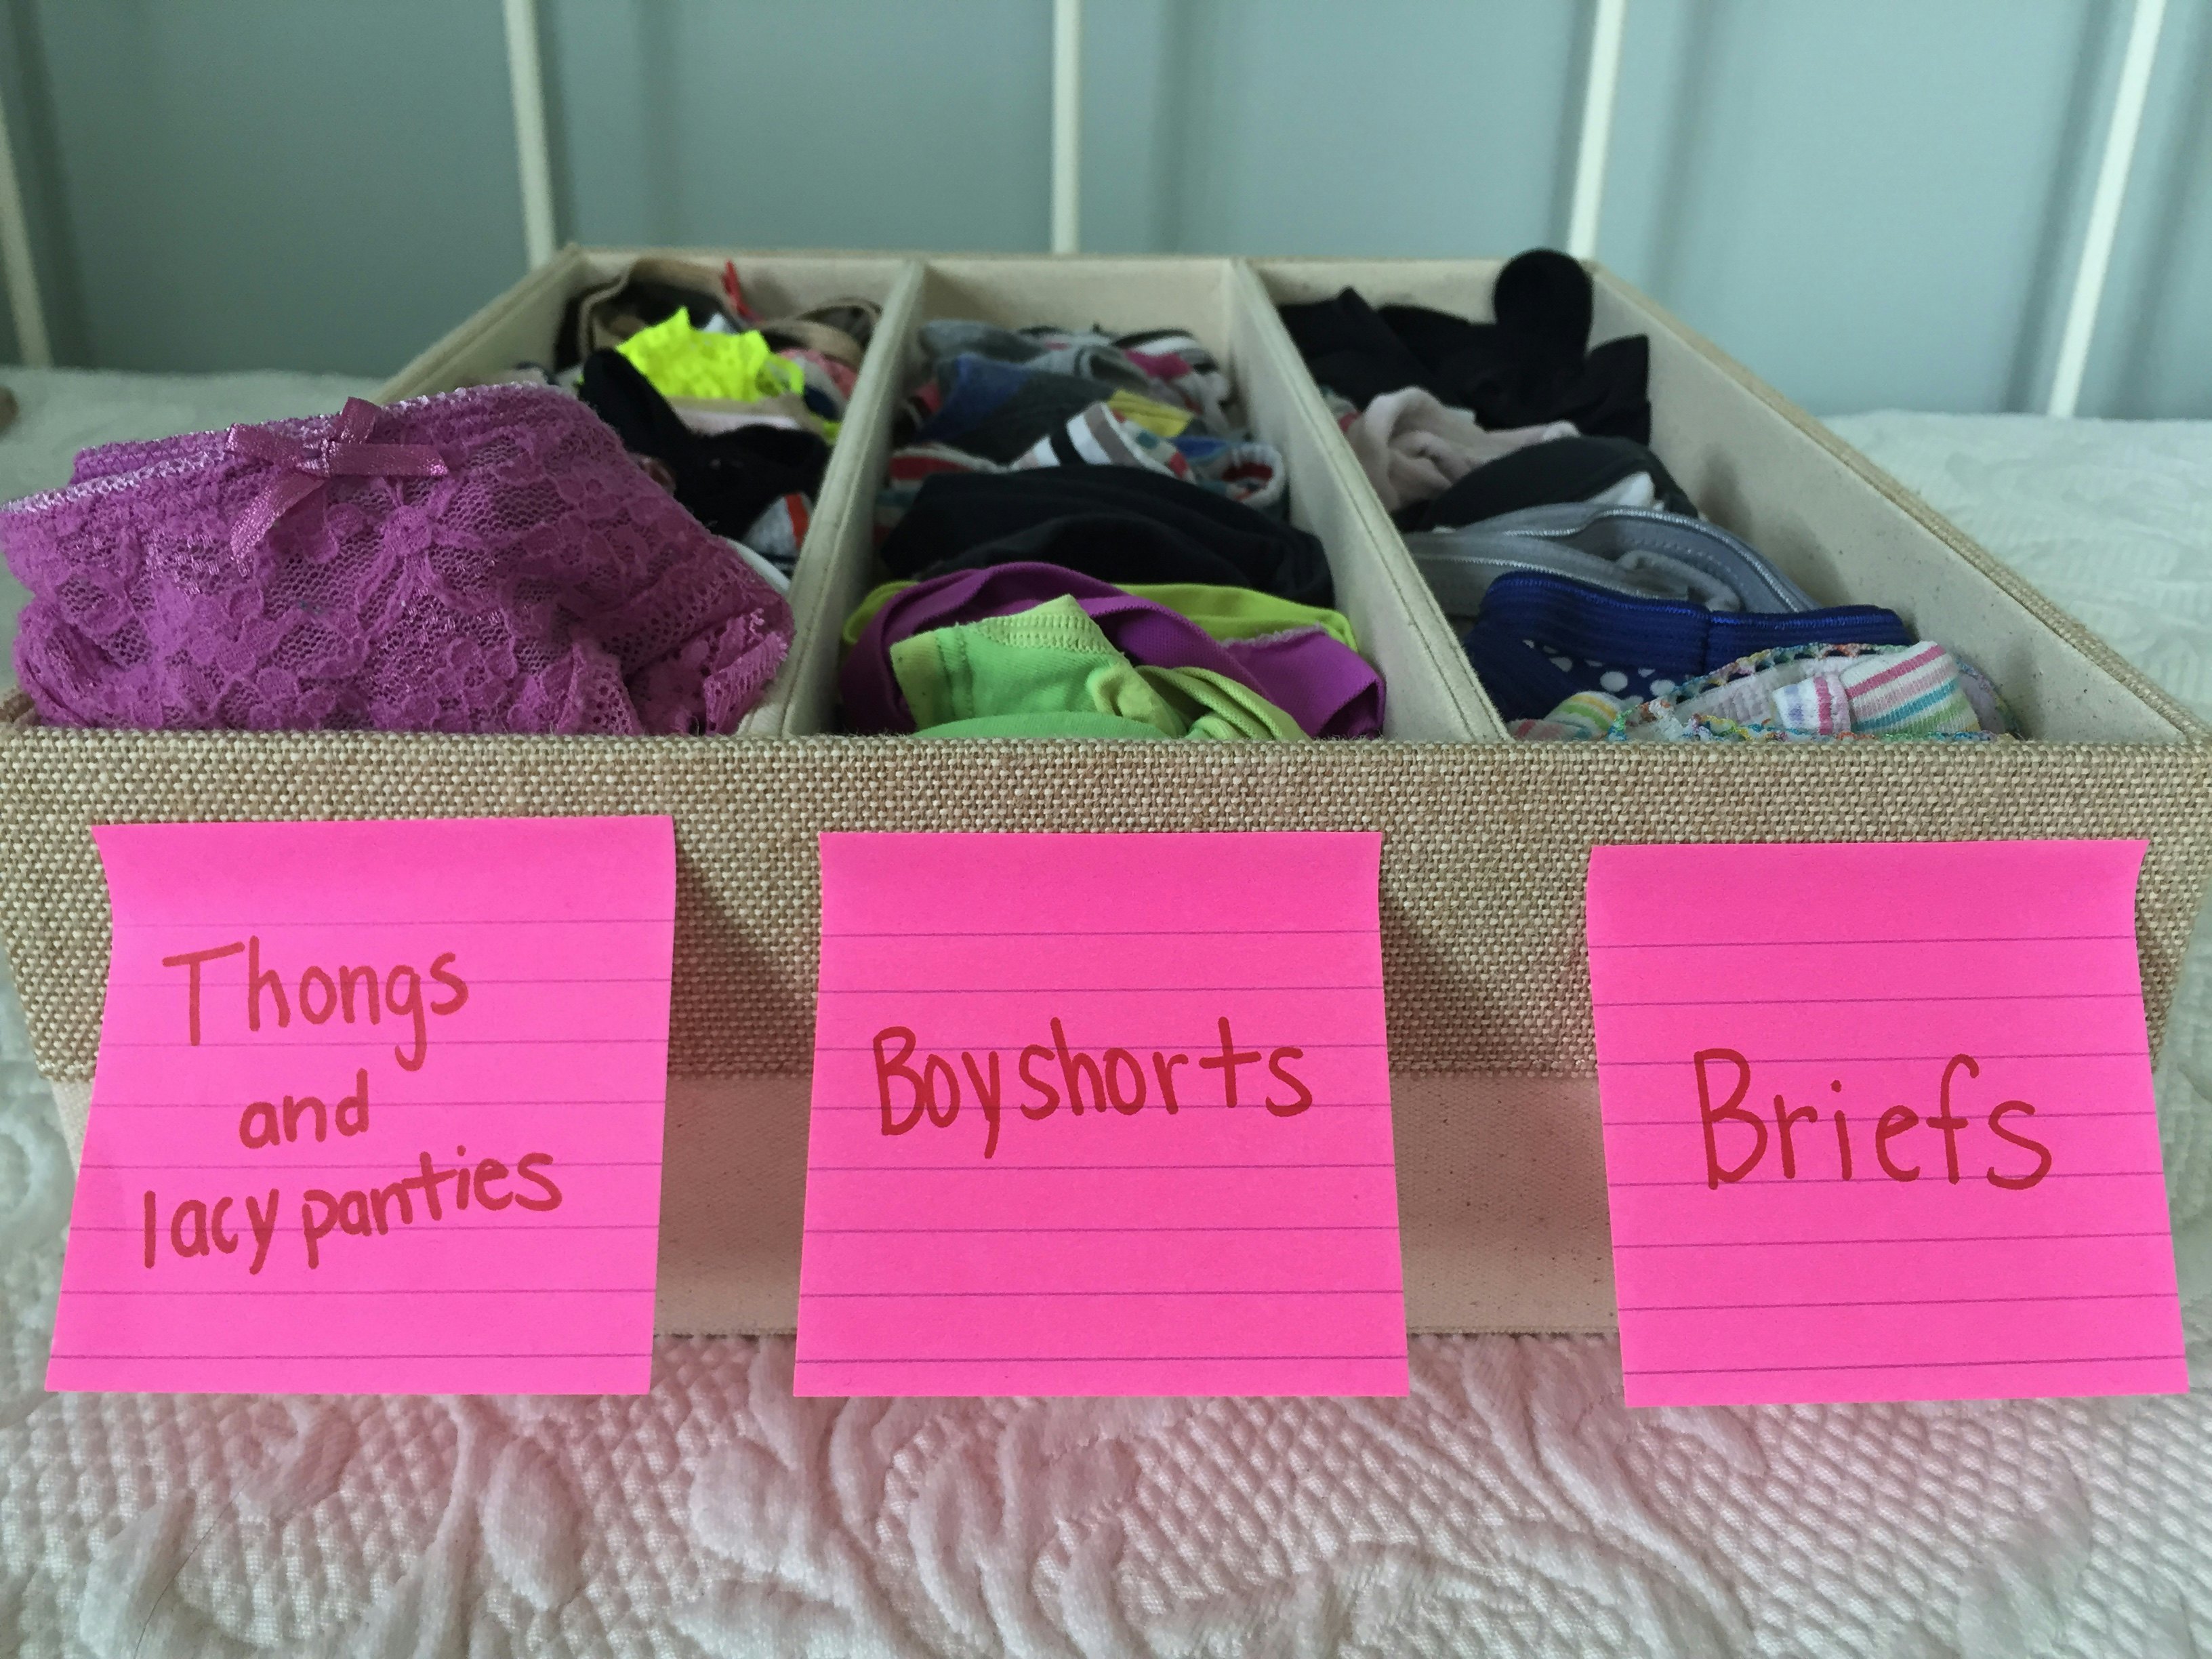 5 Ways To Organize Your Underwear Collection So Getting Dressed Is